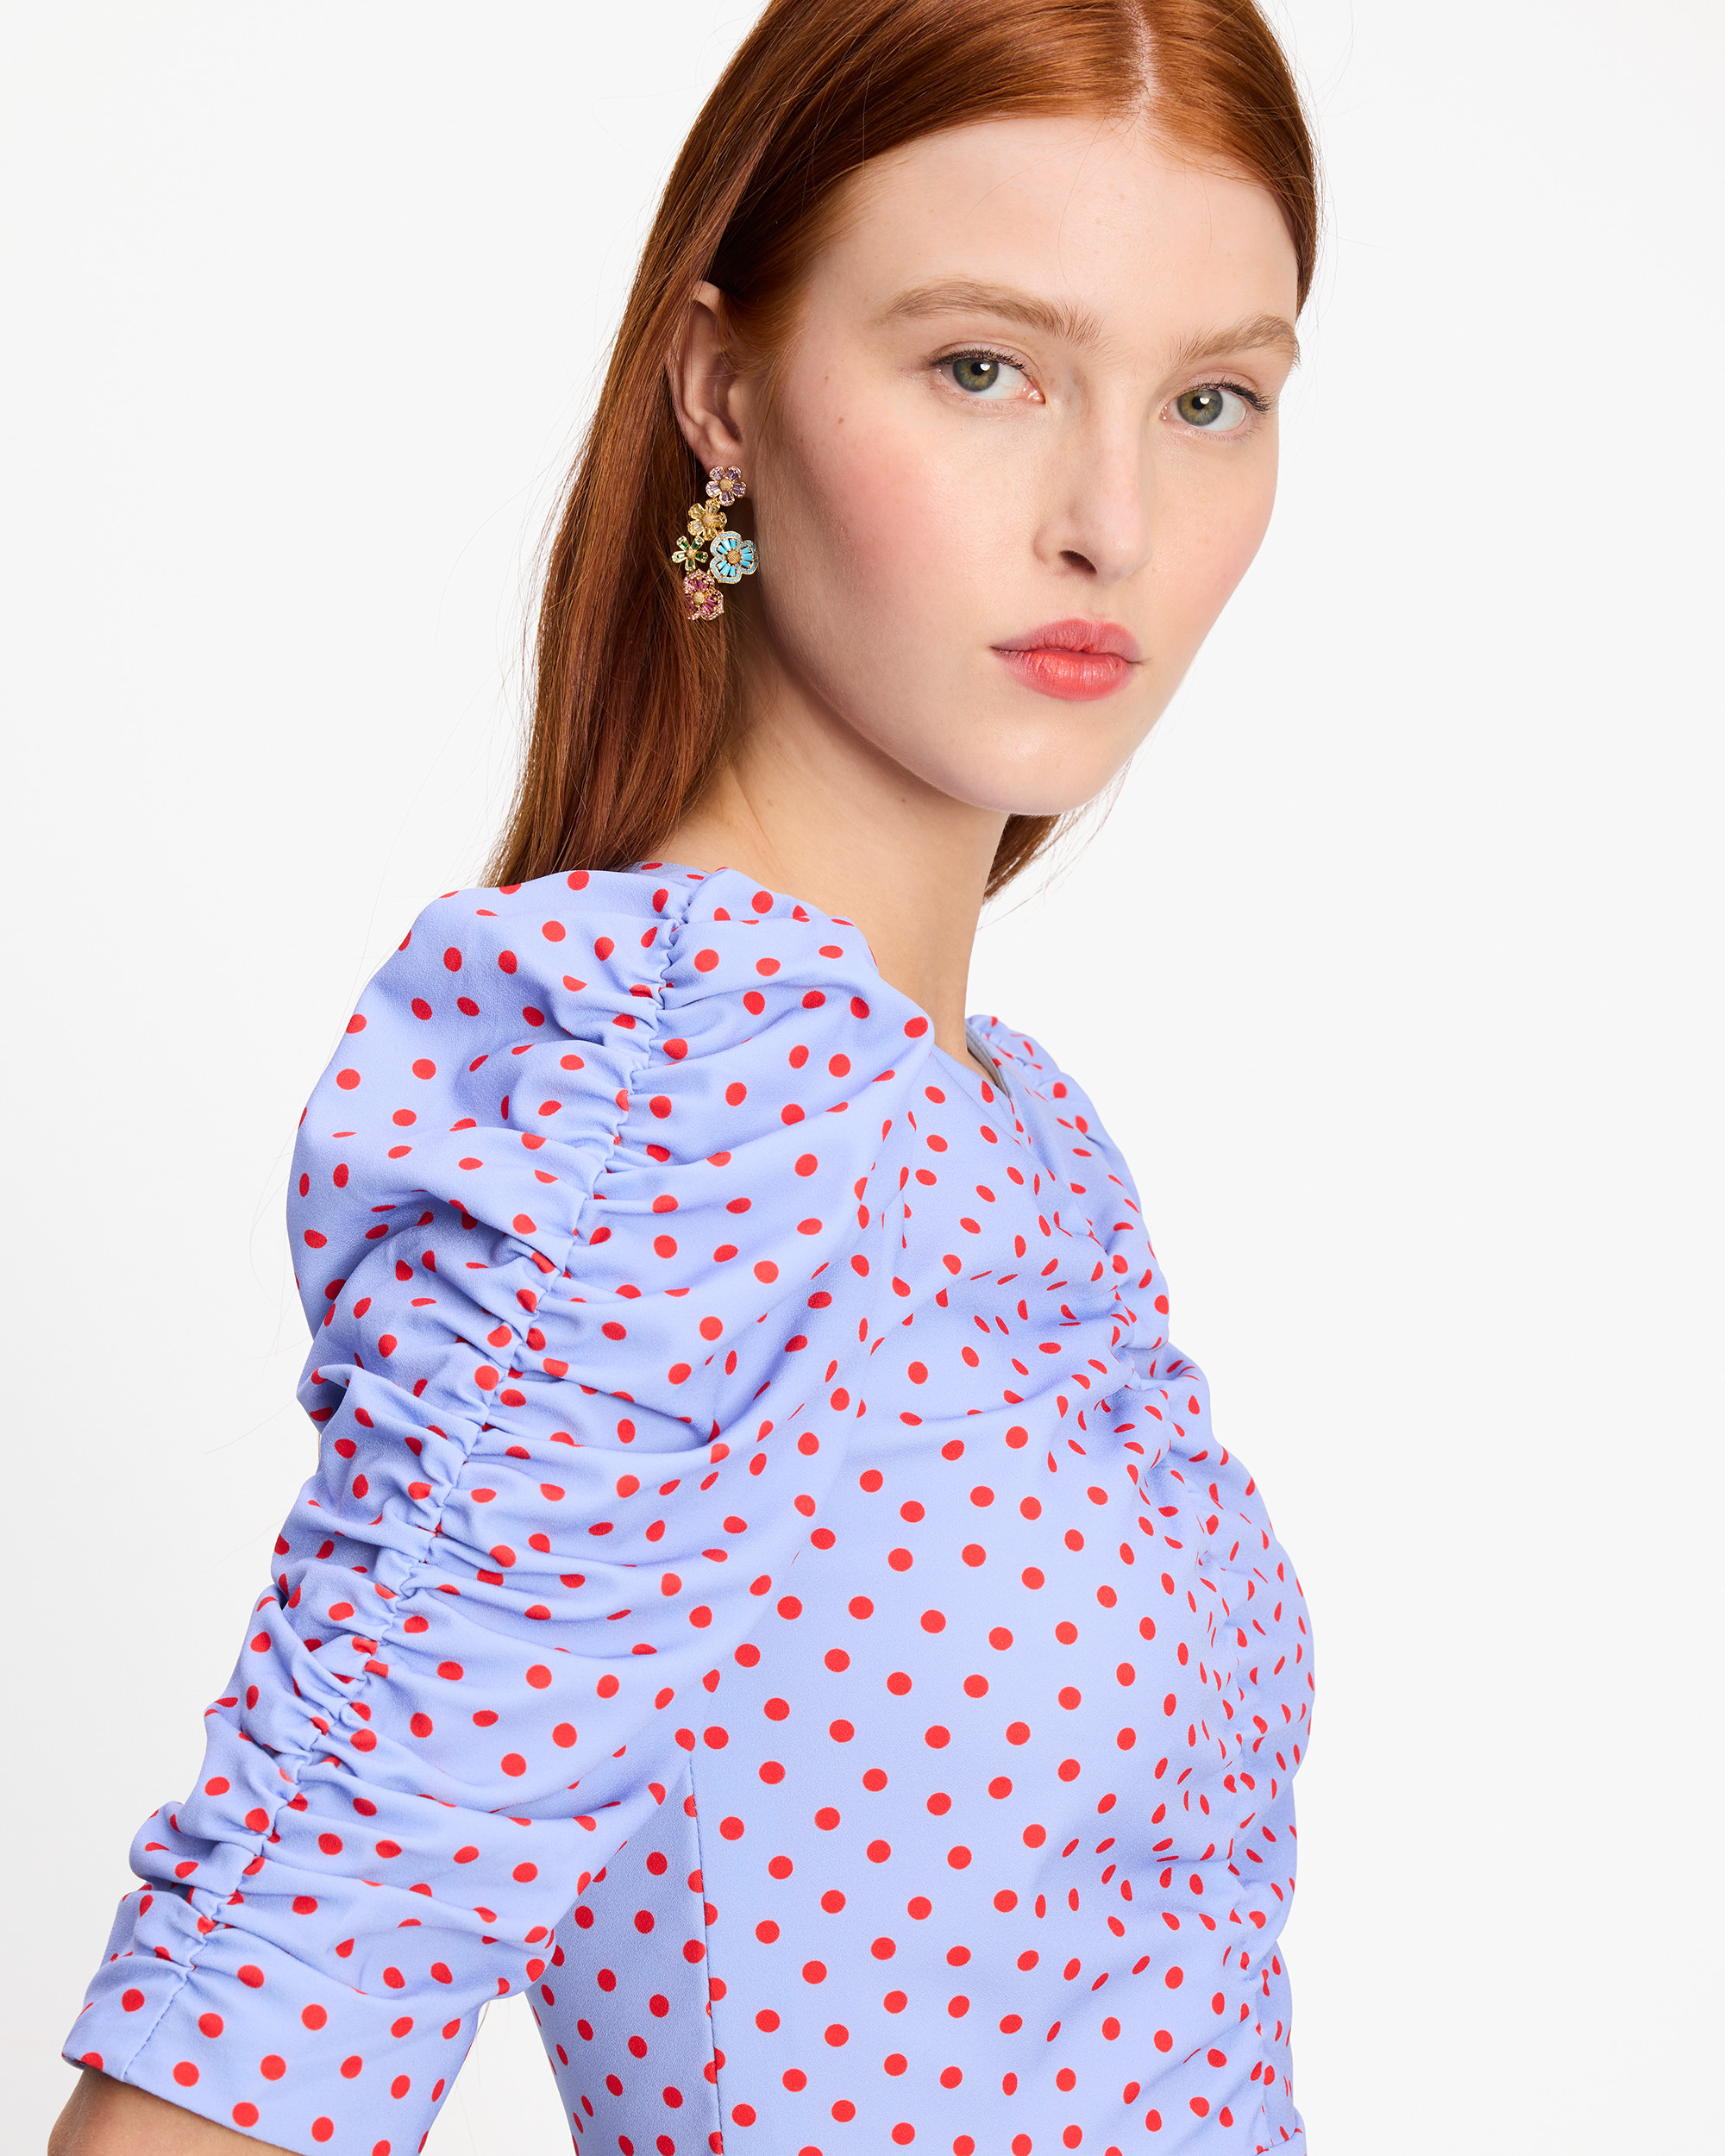 Kate Spade Spring Time Dot Ruched Top